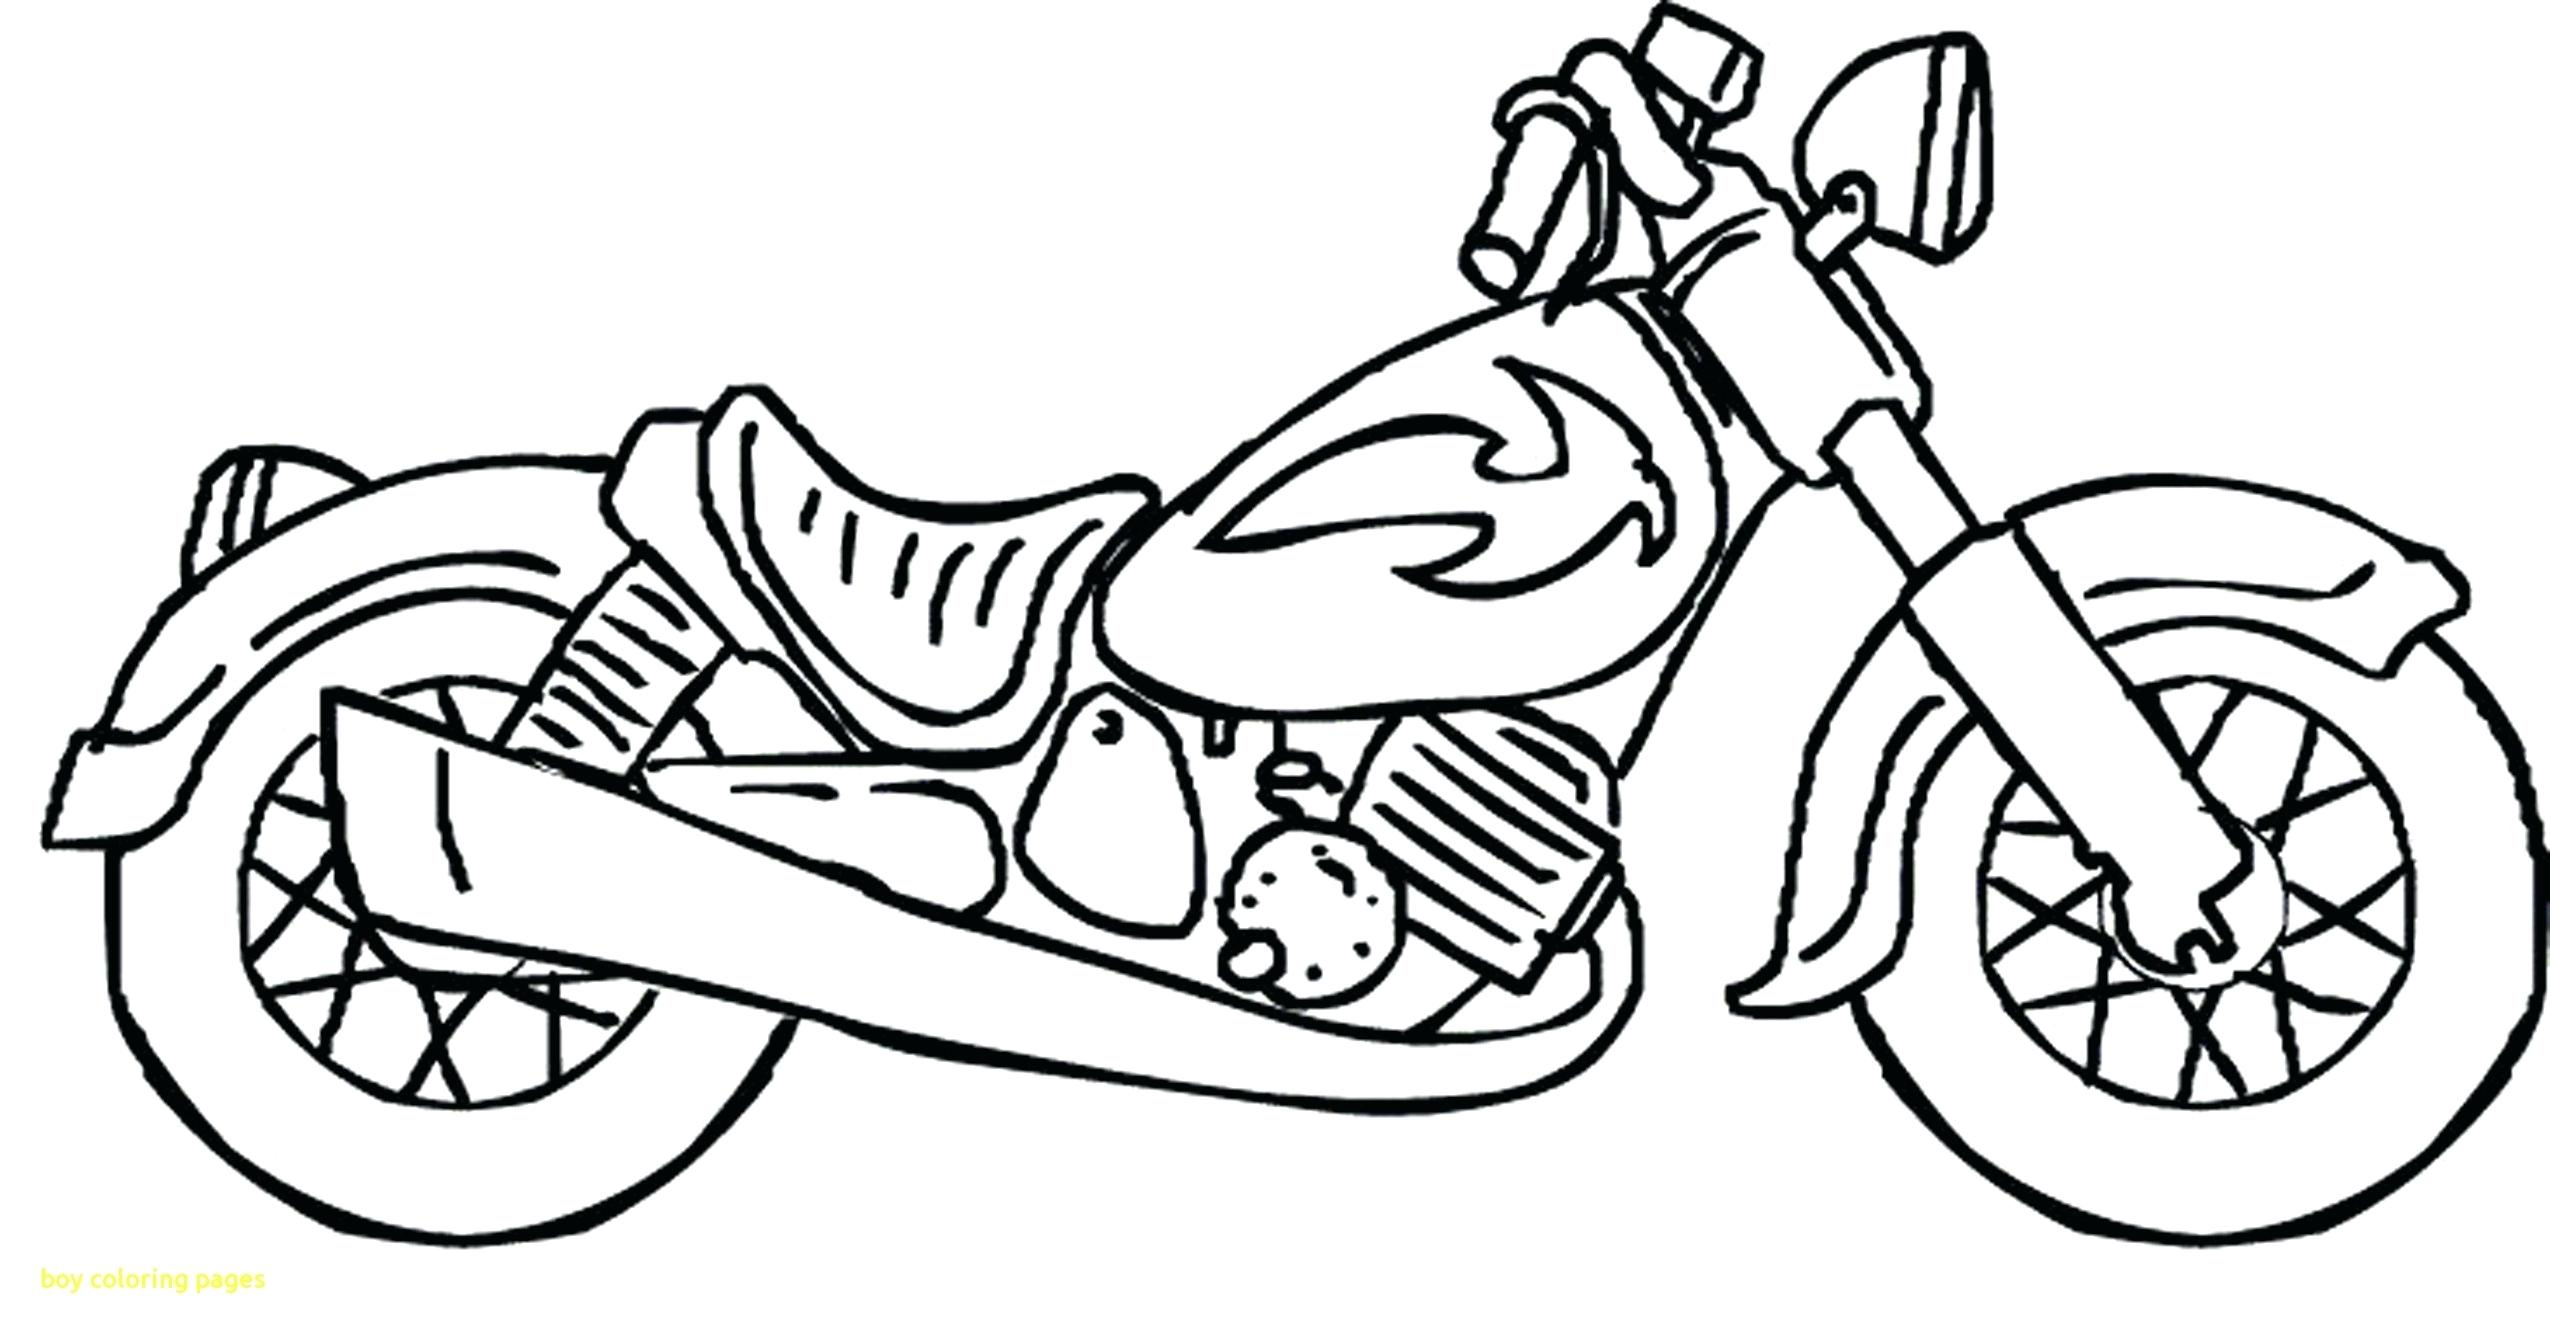 Little Boy Coloring Pages Coloring Pages For Little Boys